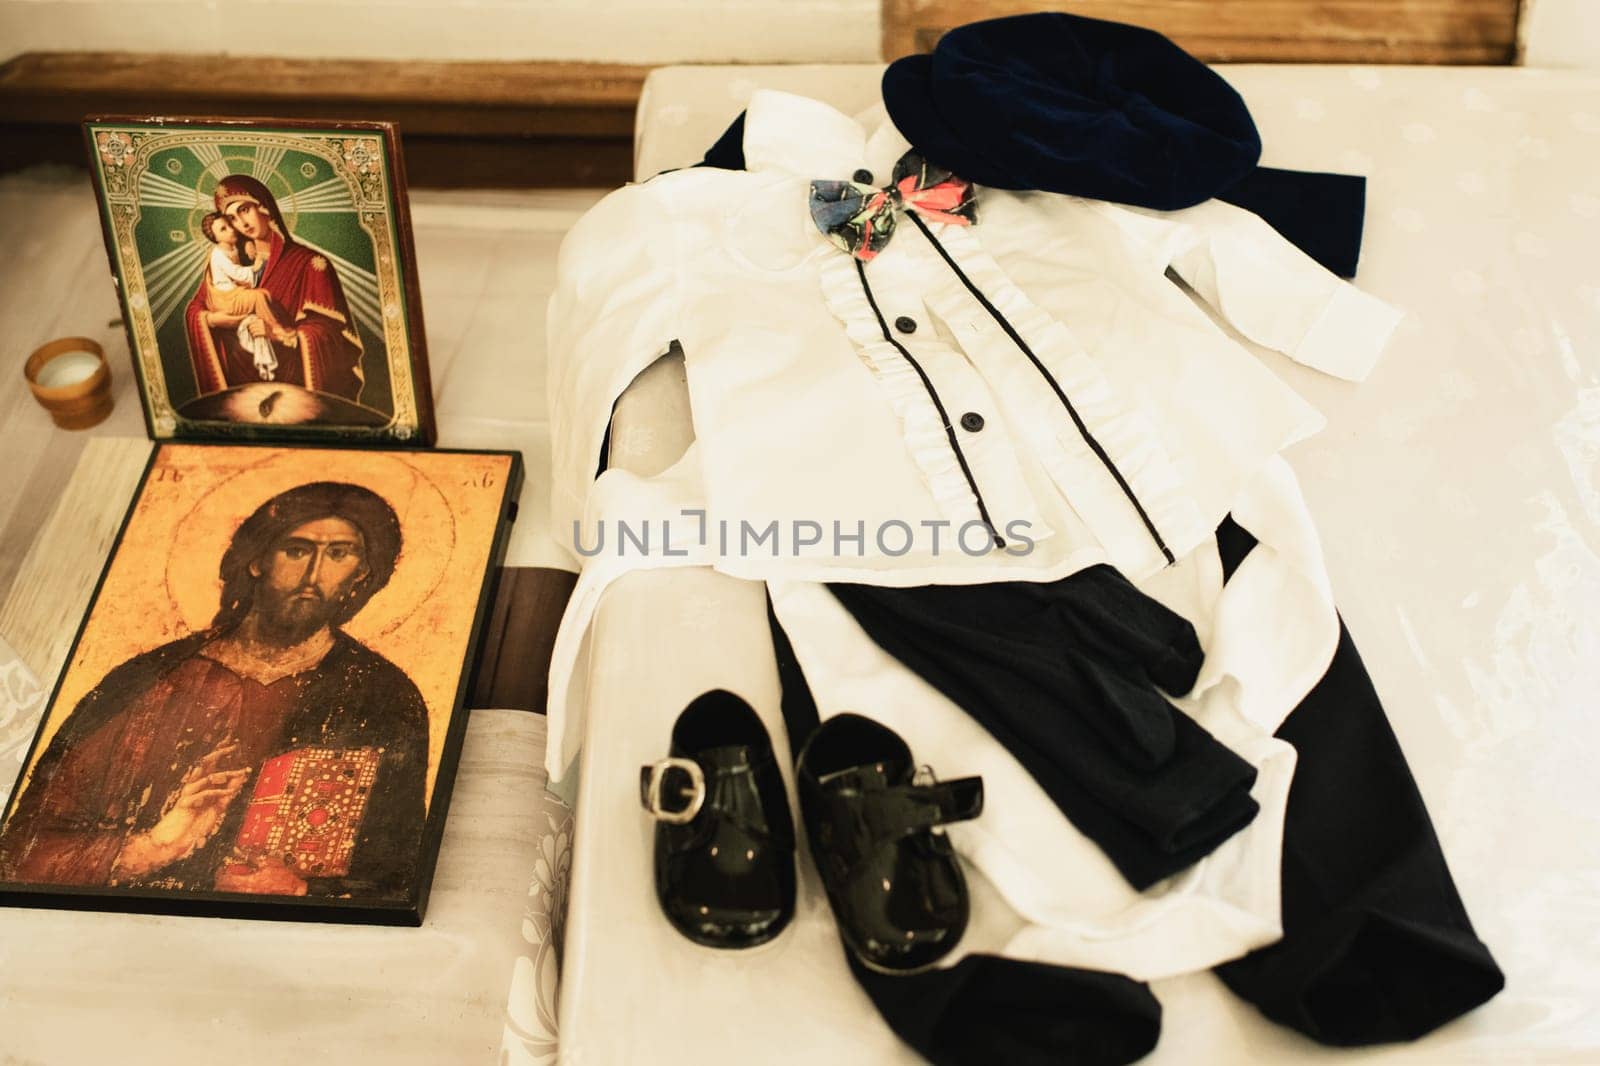 Clothes for changing after baptism in church by Godi